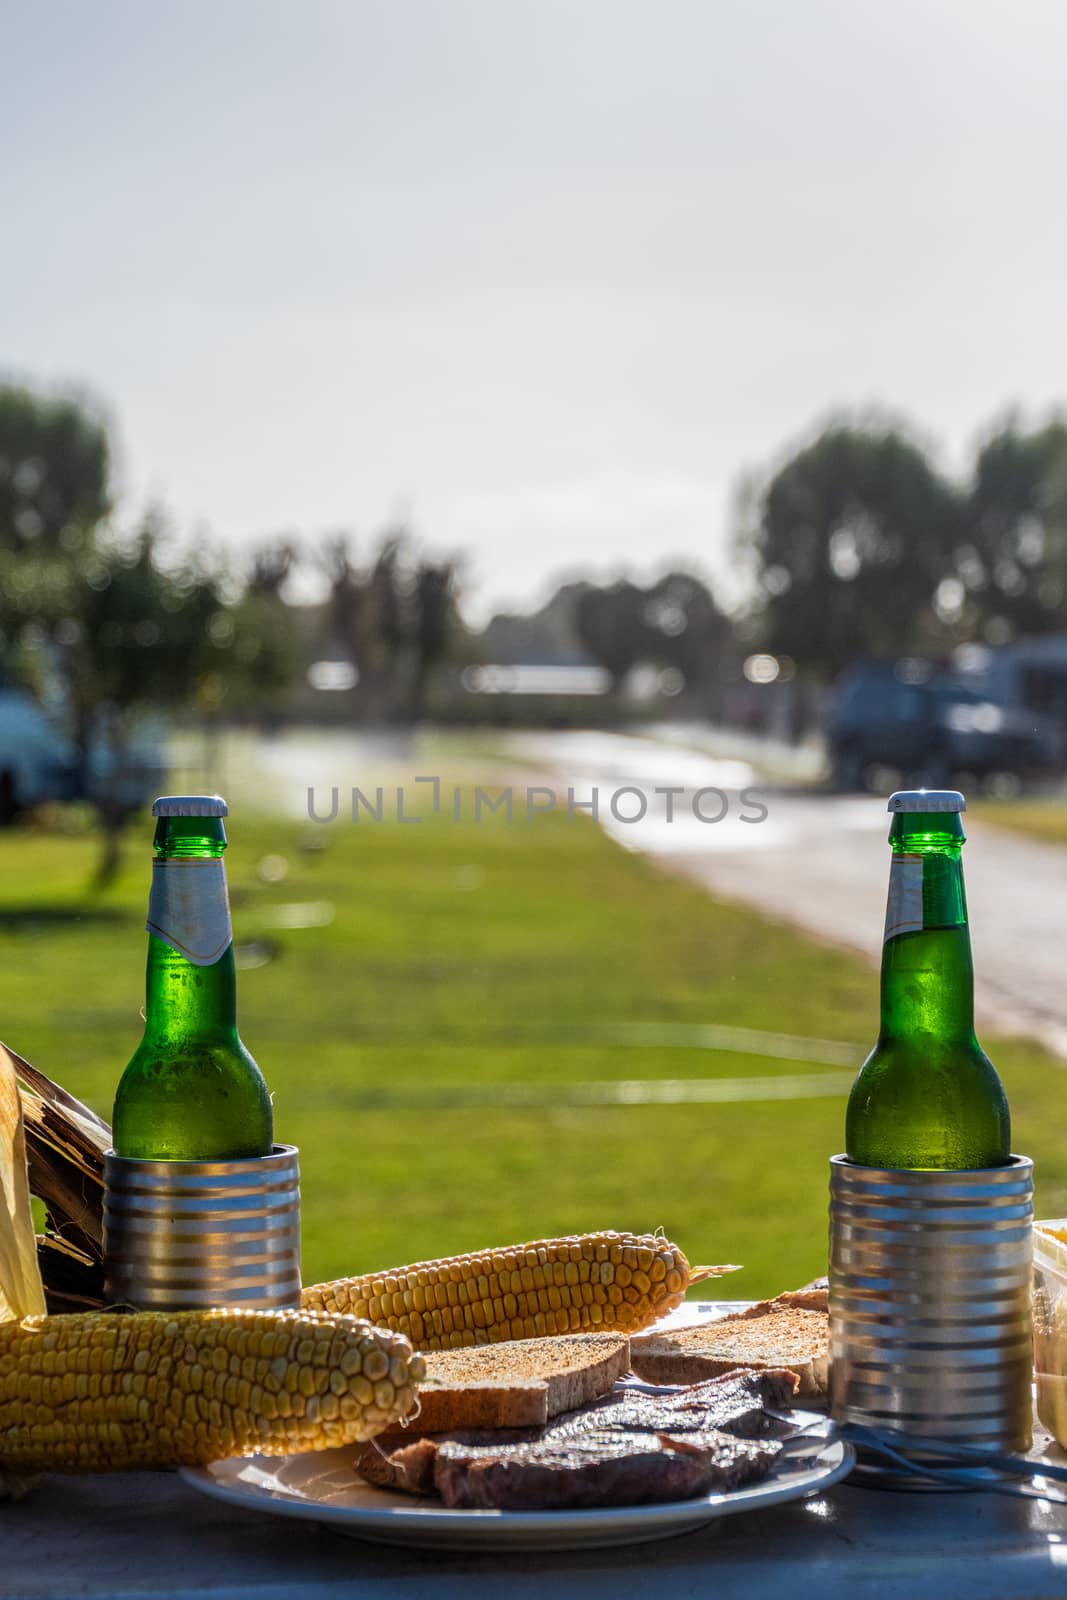 Steak beer toast and corn typical Australian camping food